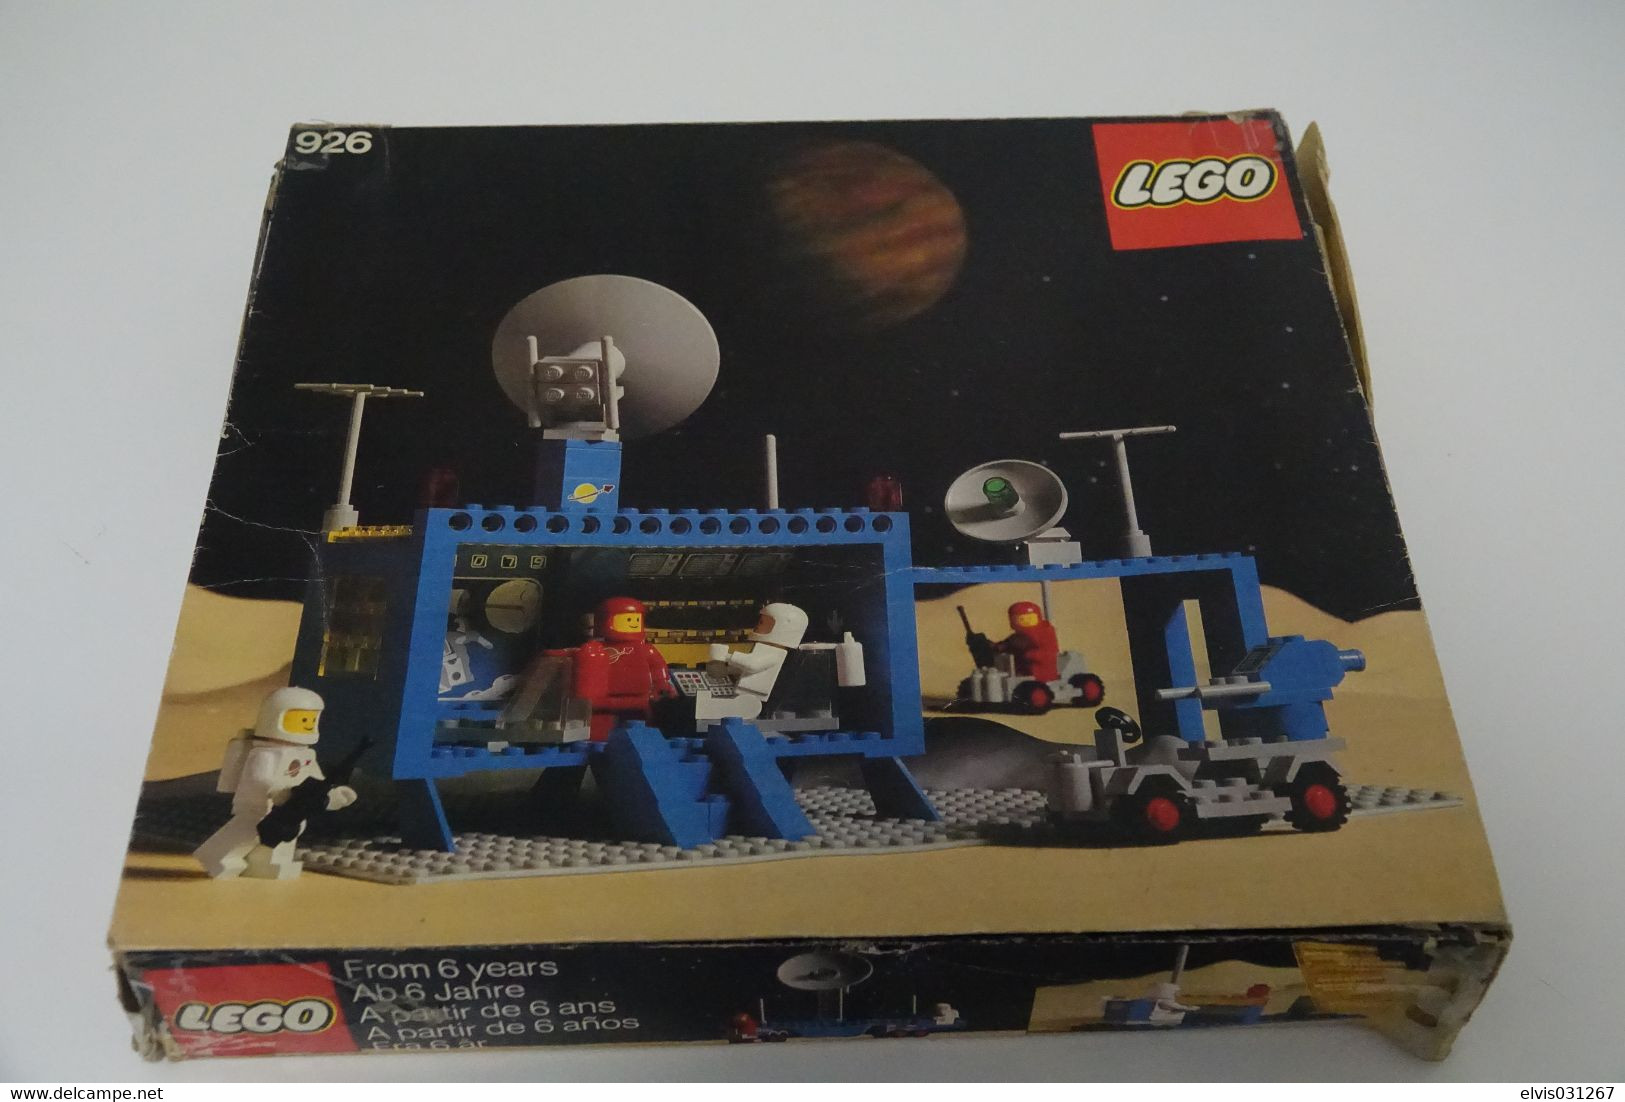 LEGO - 926 Command Centre (Center) space with box and instruction manual -  Original Lego 1979 - Vintage